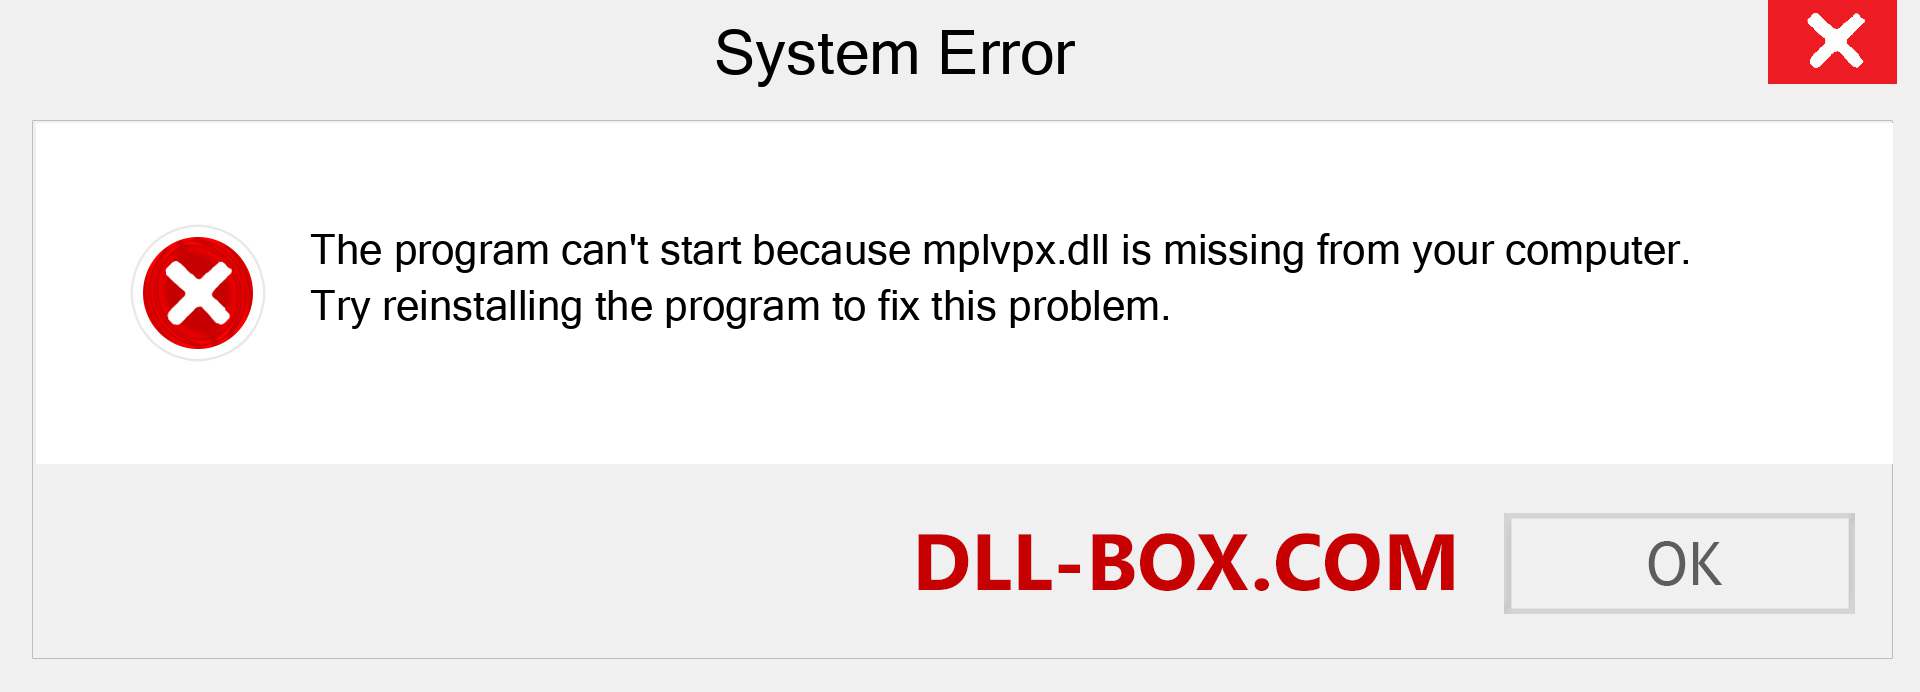  mplvpx.dll file is missing?. Download for Windows 7, 8, 10 - Fix  mplvpx dll Missing Error on Windows, photos, images